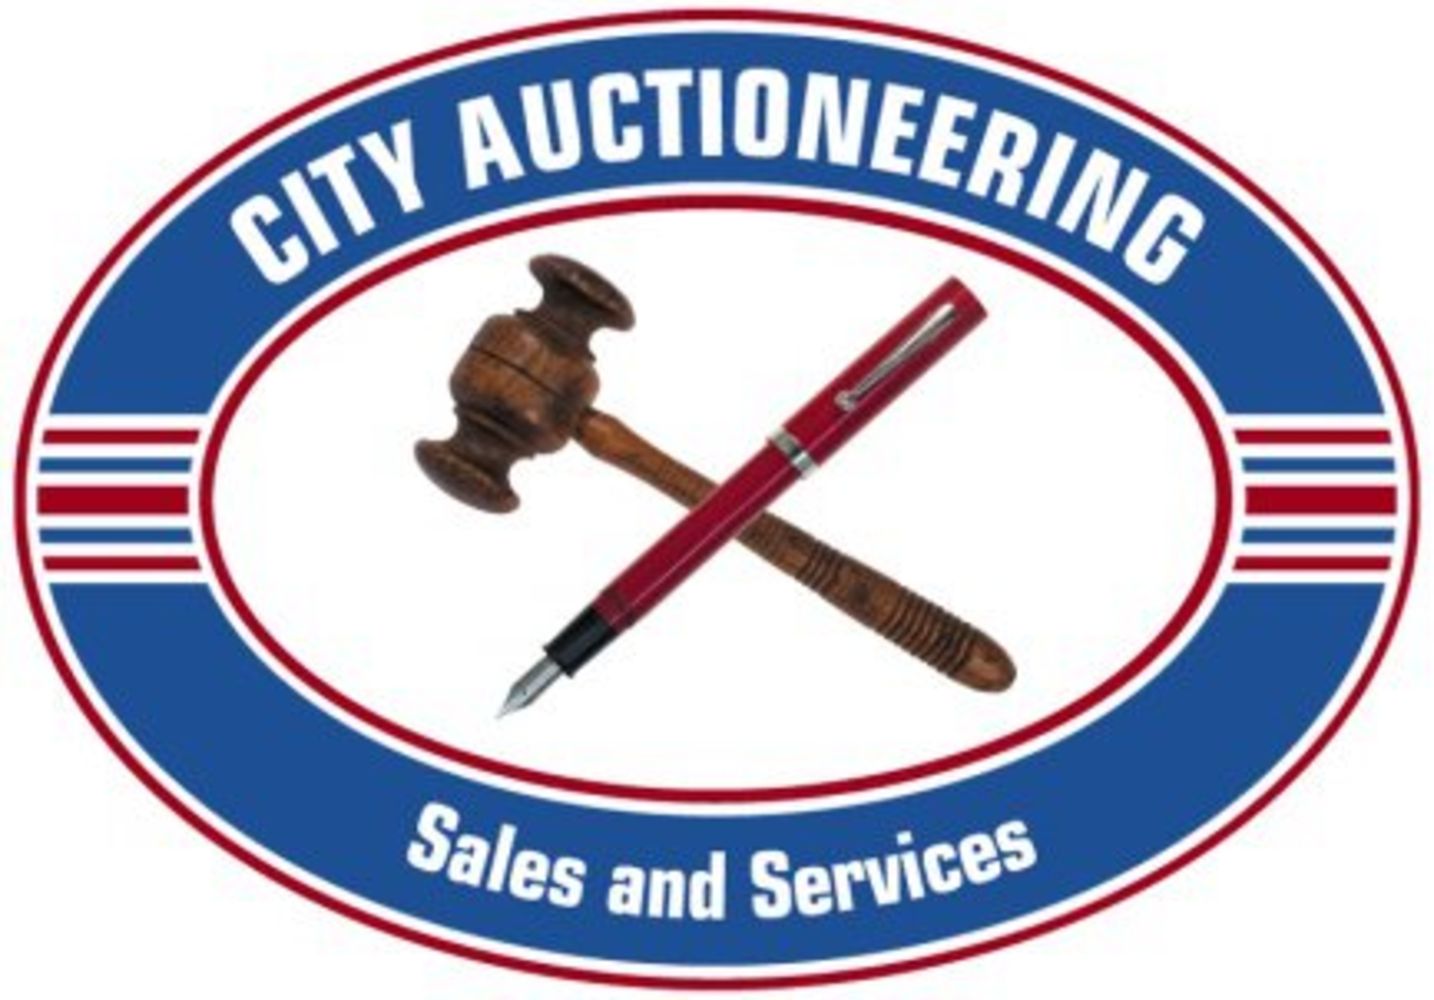 Timed General Auction Including Clothing, Tools, Electrical & Luxury